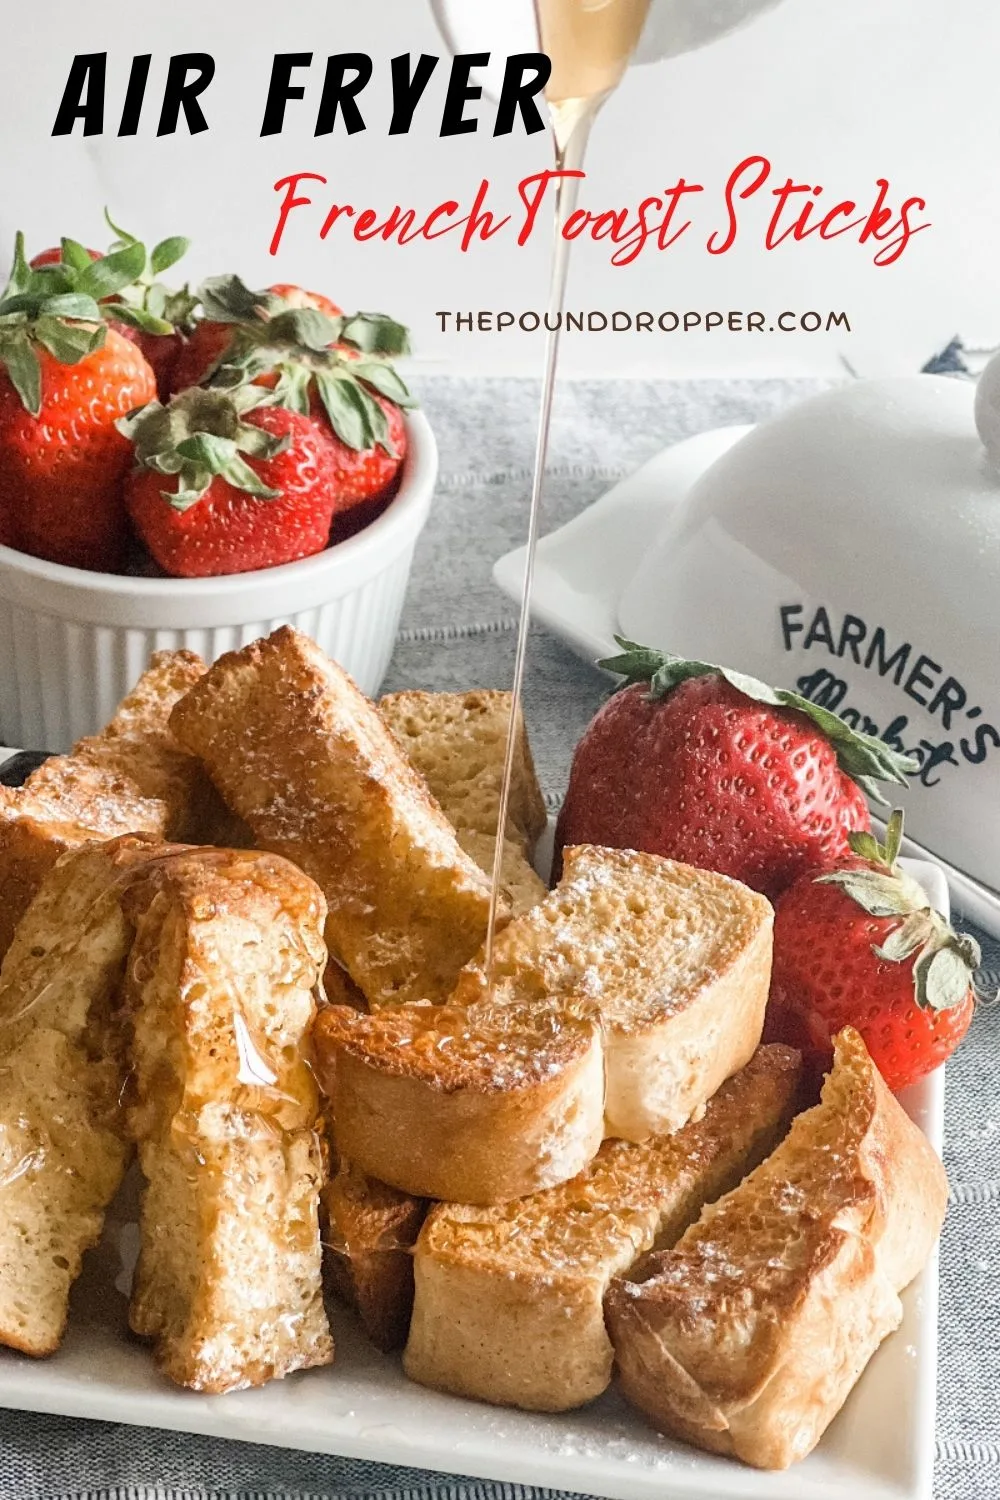 Easy Air Fryer French Toast Sticks   Pound Dropper